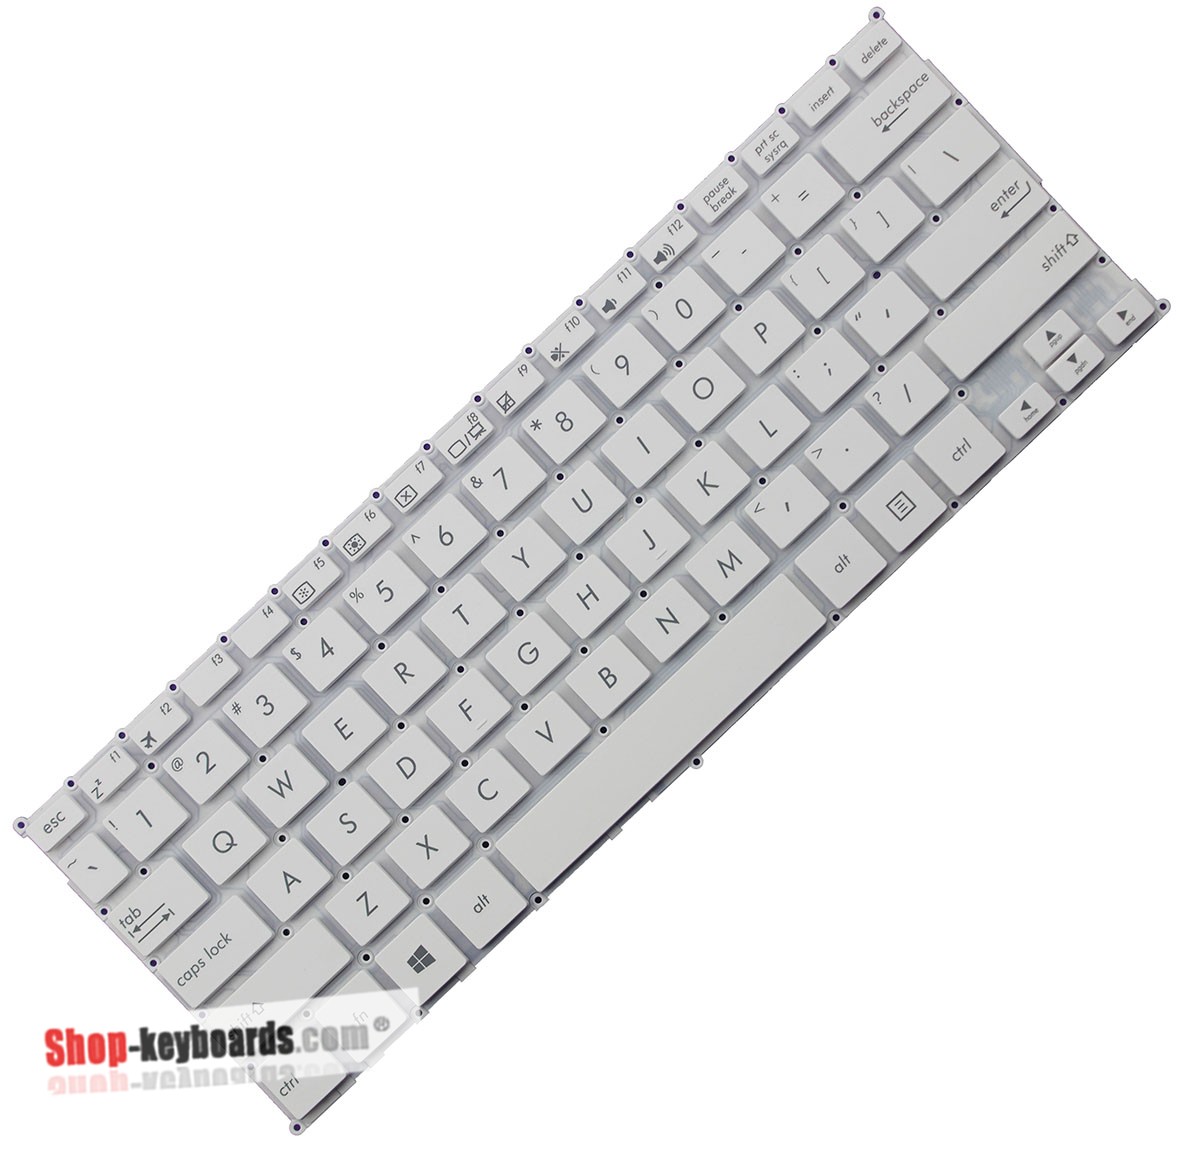 Asus 0KNL0-1123ND00 Keyboard replacement